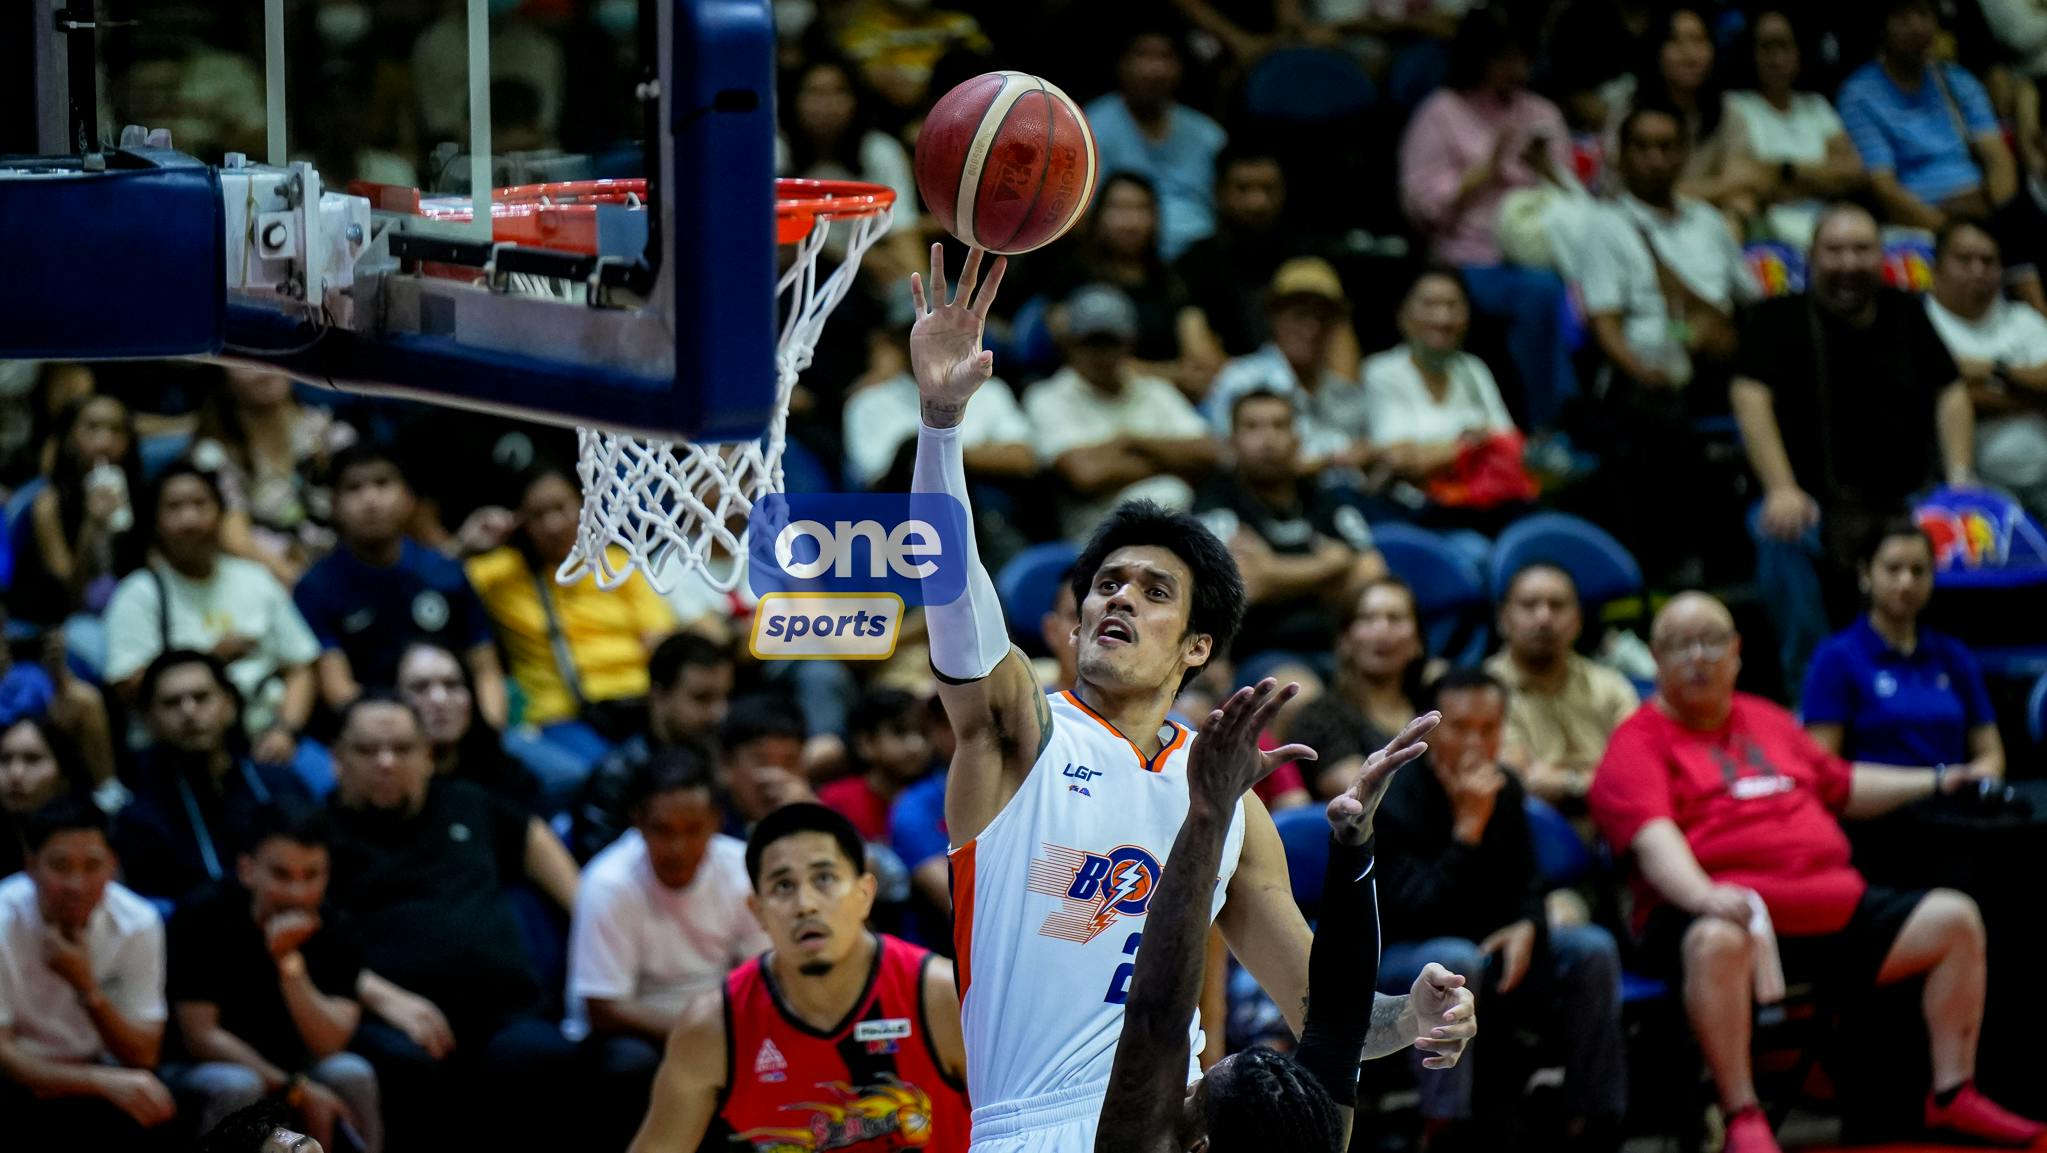 PBA: Raymond Almazan bounces back with strong offensive game as Meralco takes 2-1 Finals lead vs. San Miguel